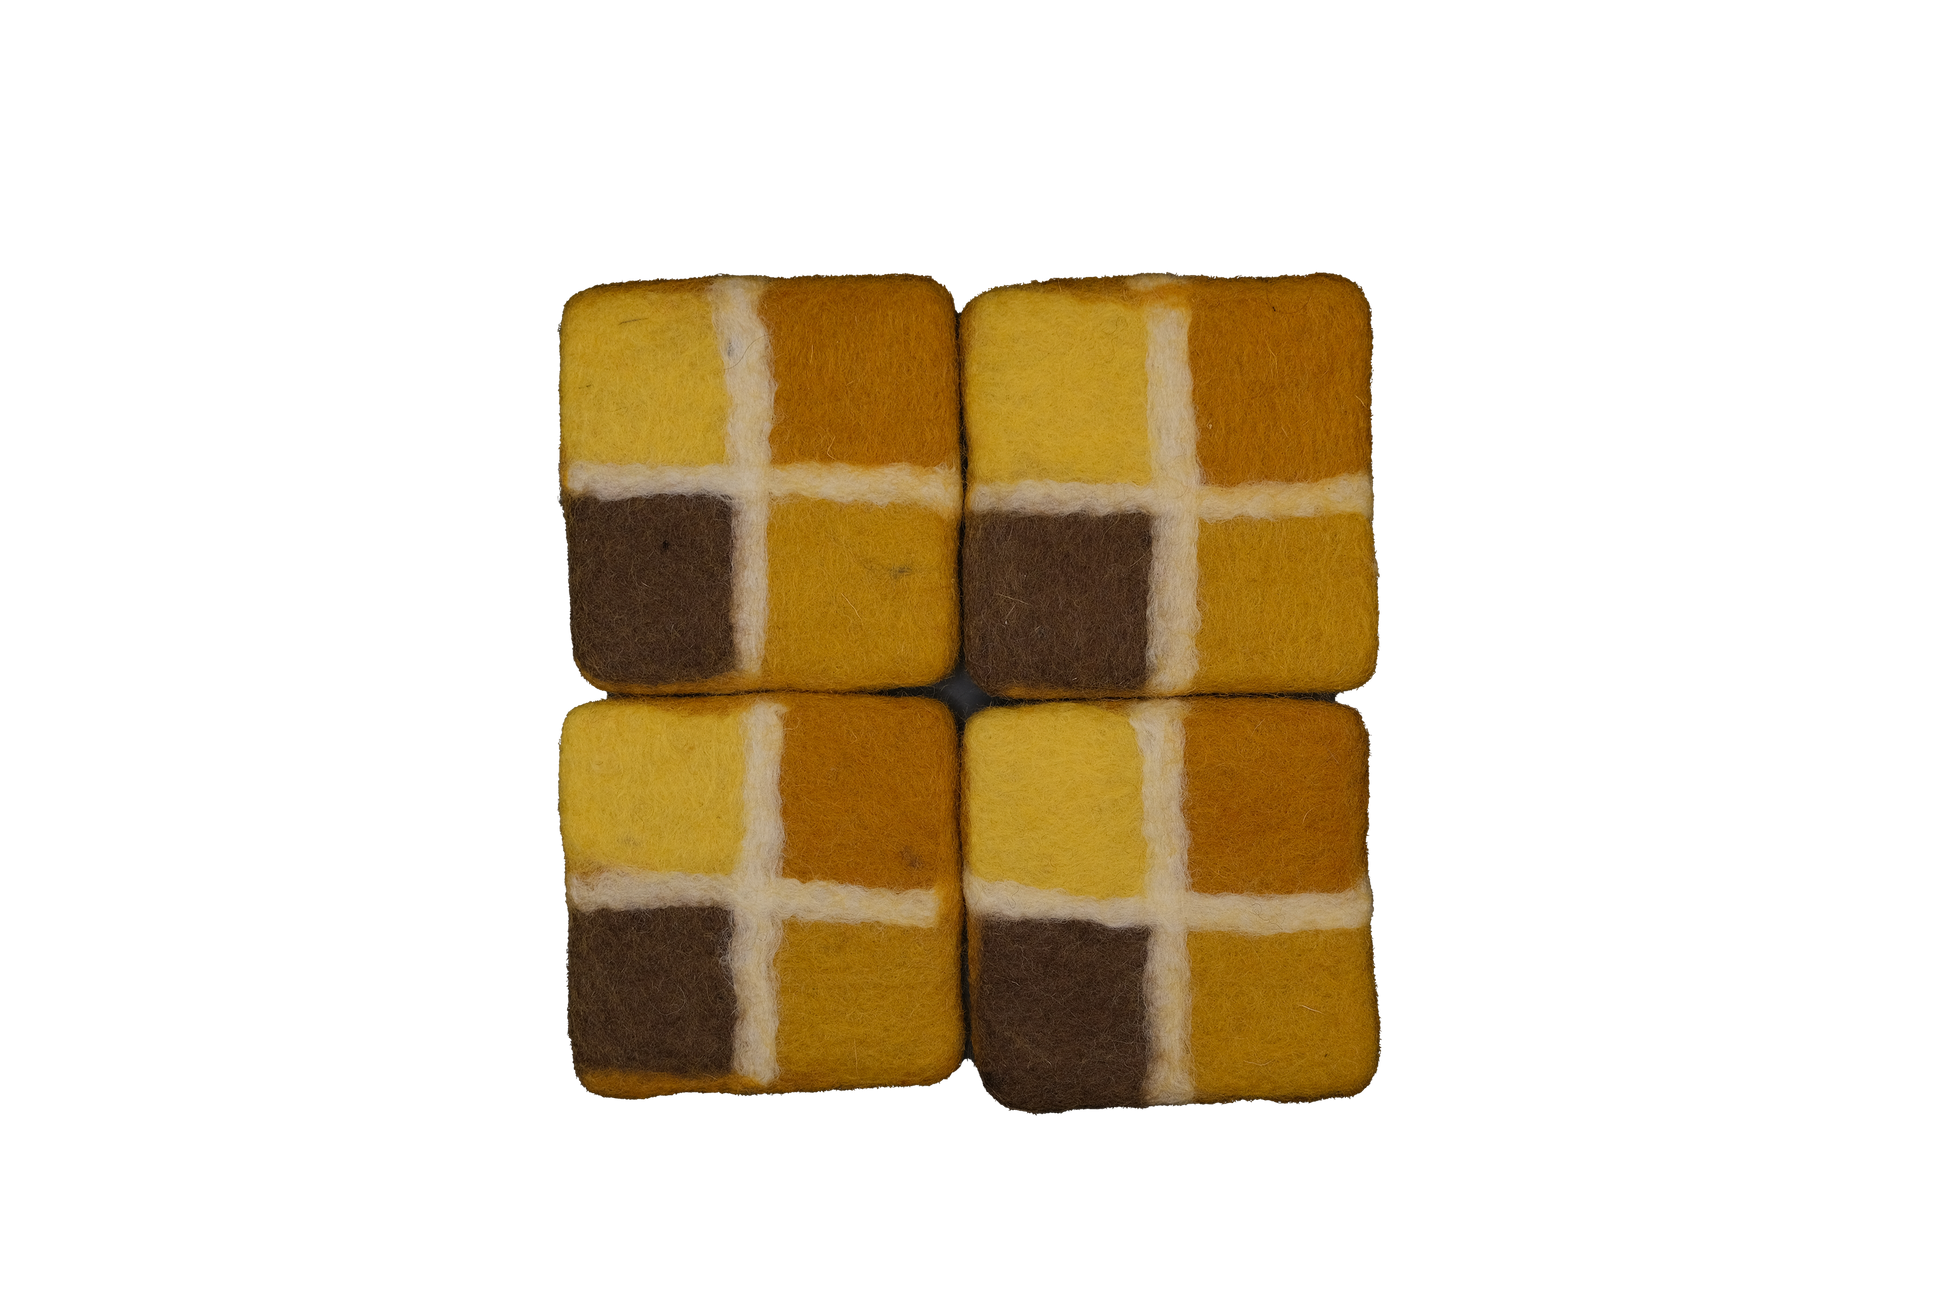 This Global Groove Life, handmade, ethical, fair trade, eco-friendly, sustainable, New Zealand wool felt, Honey yellow coaster set, was created by artisans in Kathmandu Nepal and will bring colorful warmth and functionality to your table top.